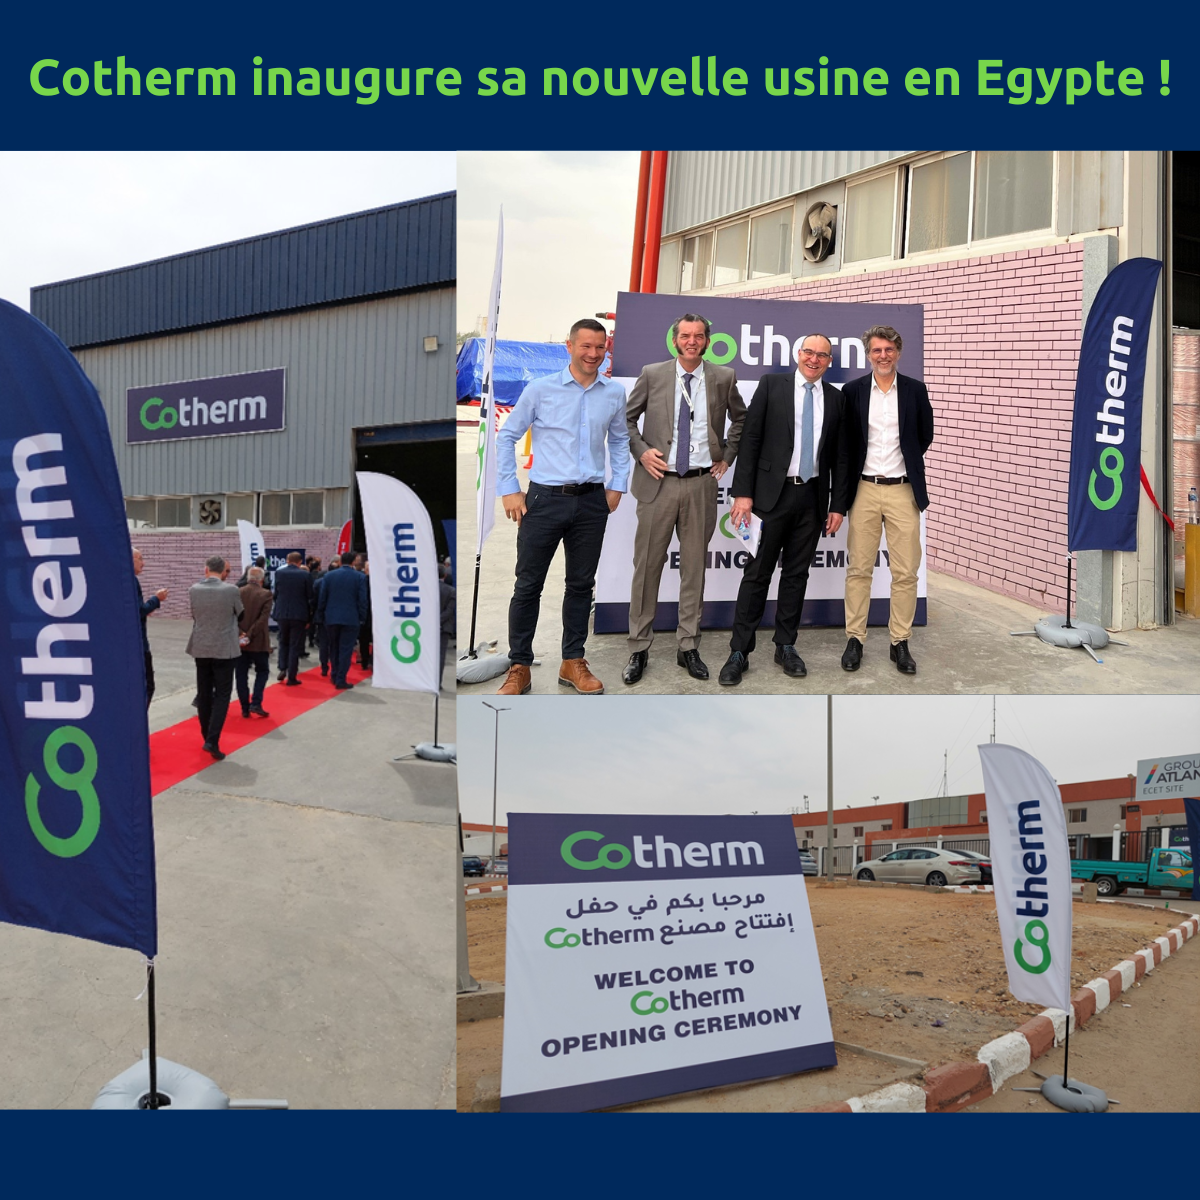 INAUGURATION DE COTHERM TOR!🎉